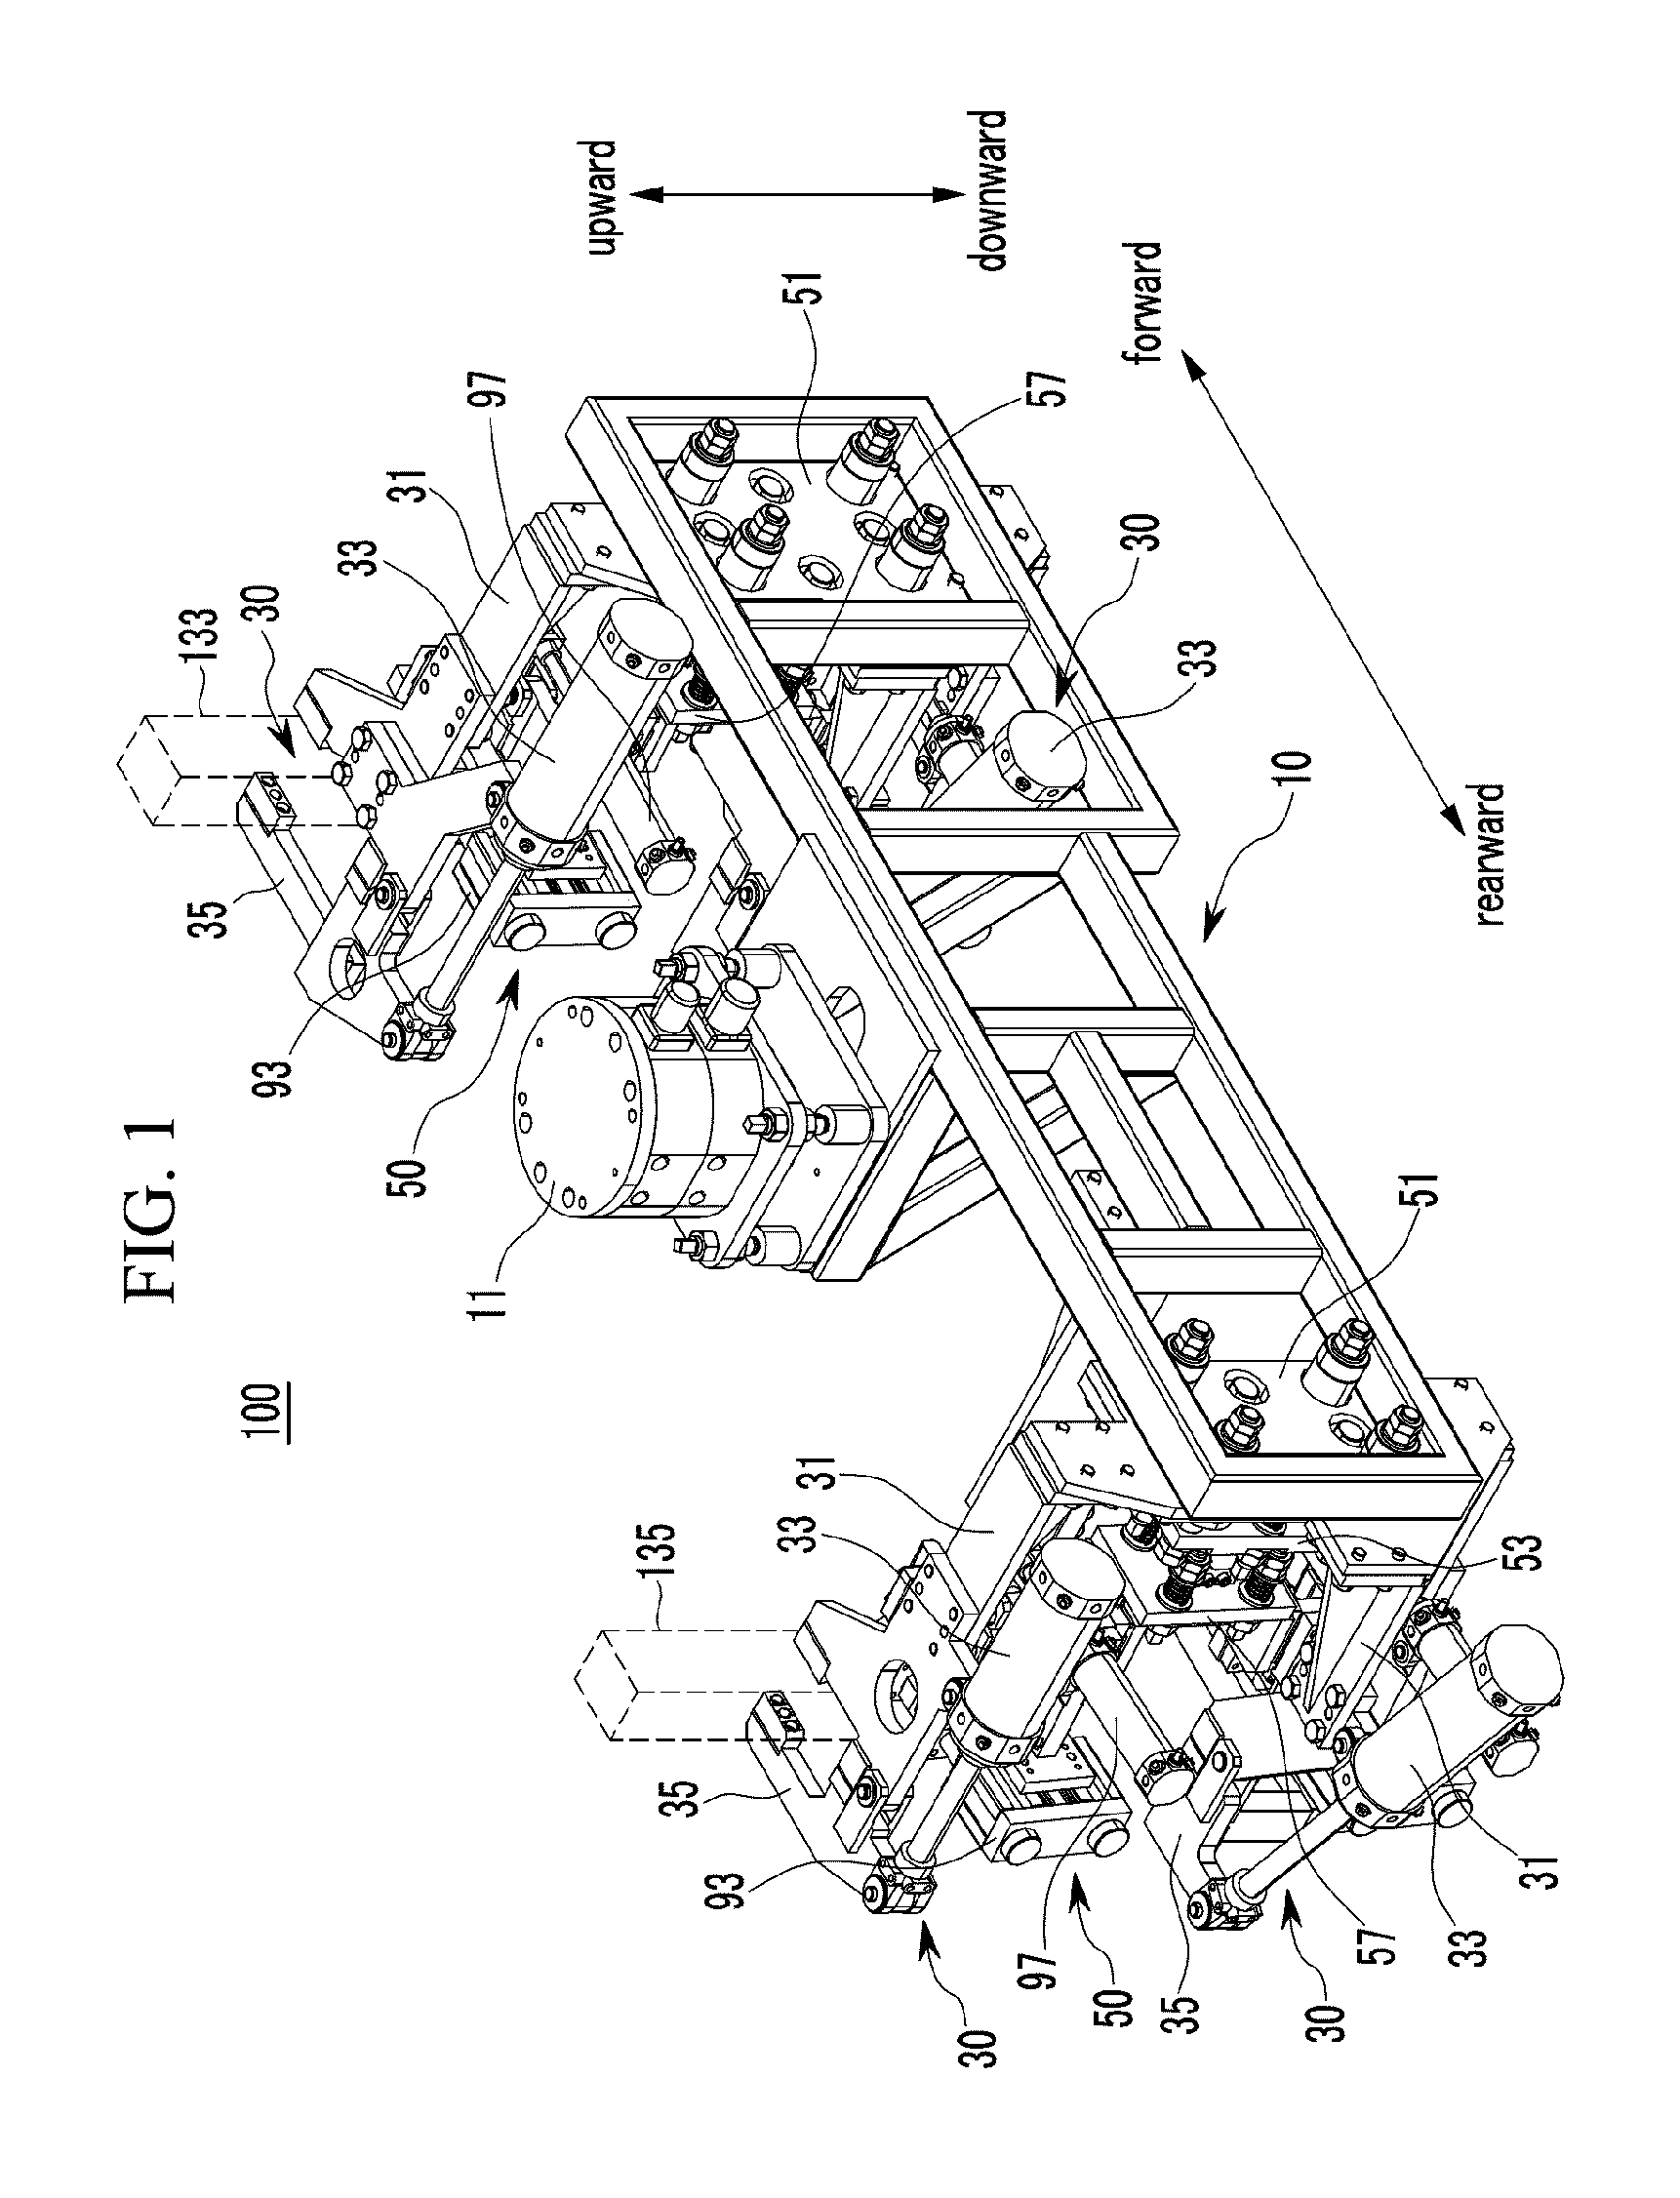 Mounting device for vehicle door hinge